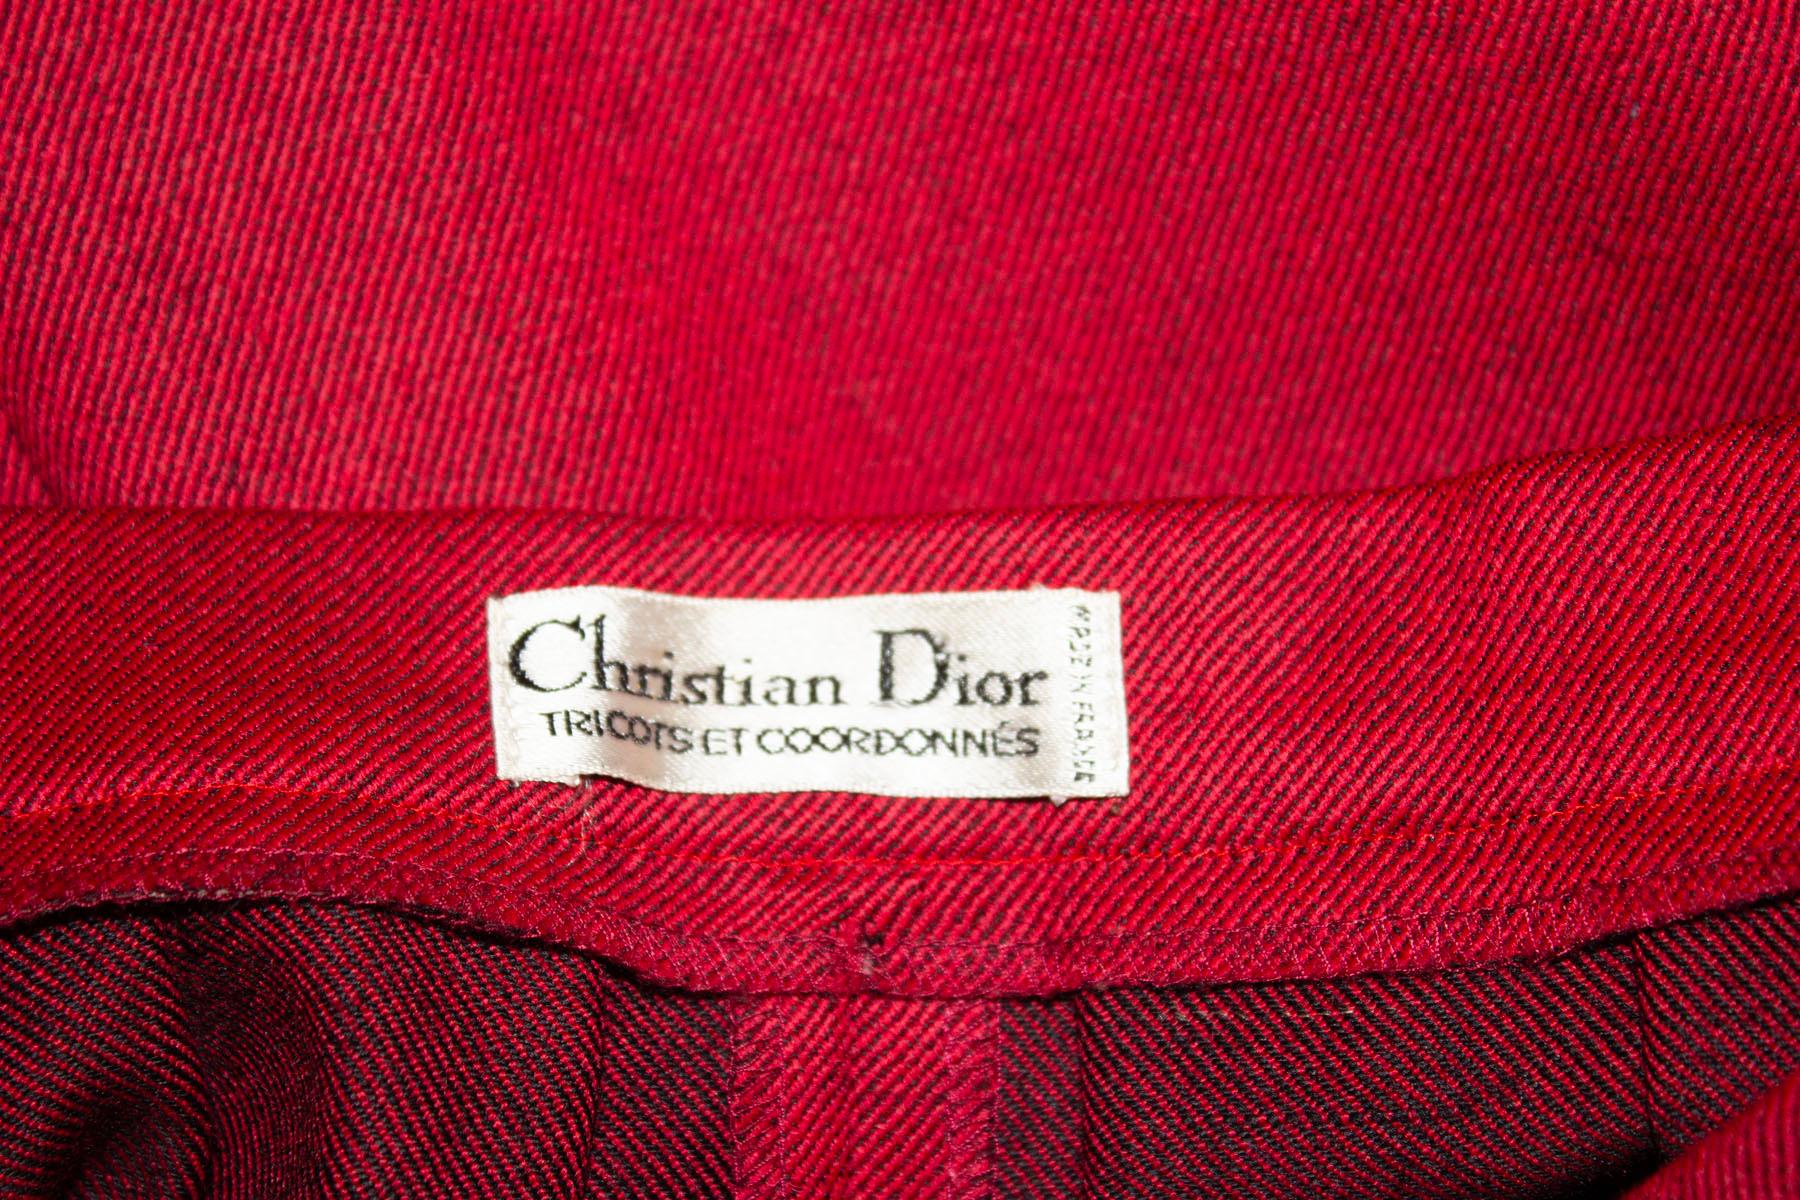 A chic and easy to wear vintage wool skirt by Christian Dior . The skirt is in a wonderful red wool with black weave. It has gathering at the waist, has  button through front and is unlined. There is a pocket on each side.
Measurements: Waist 26'',